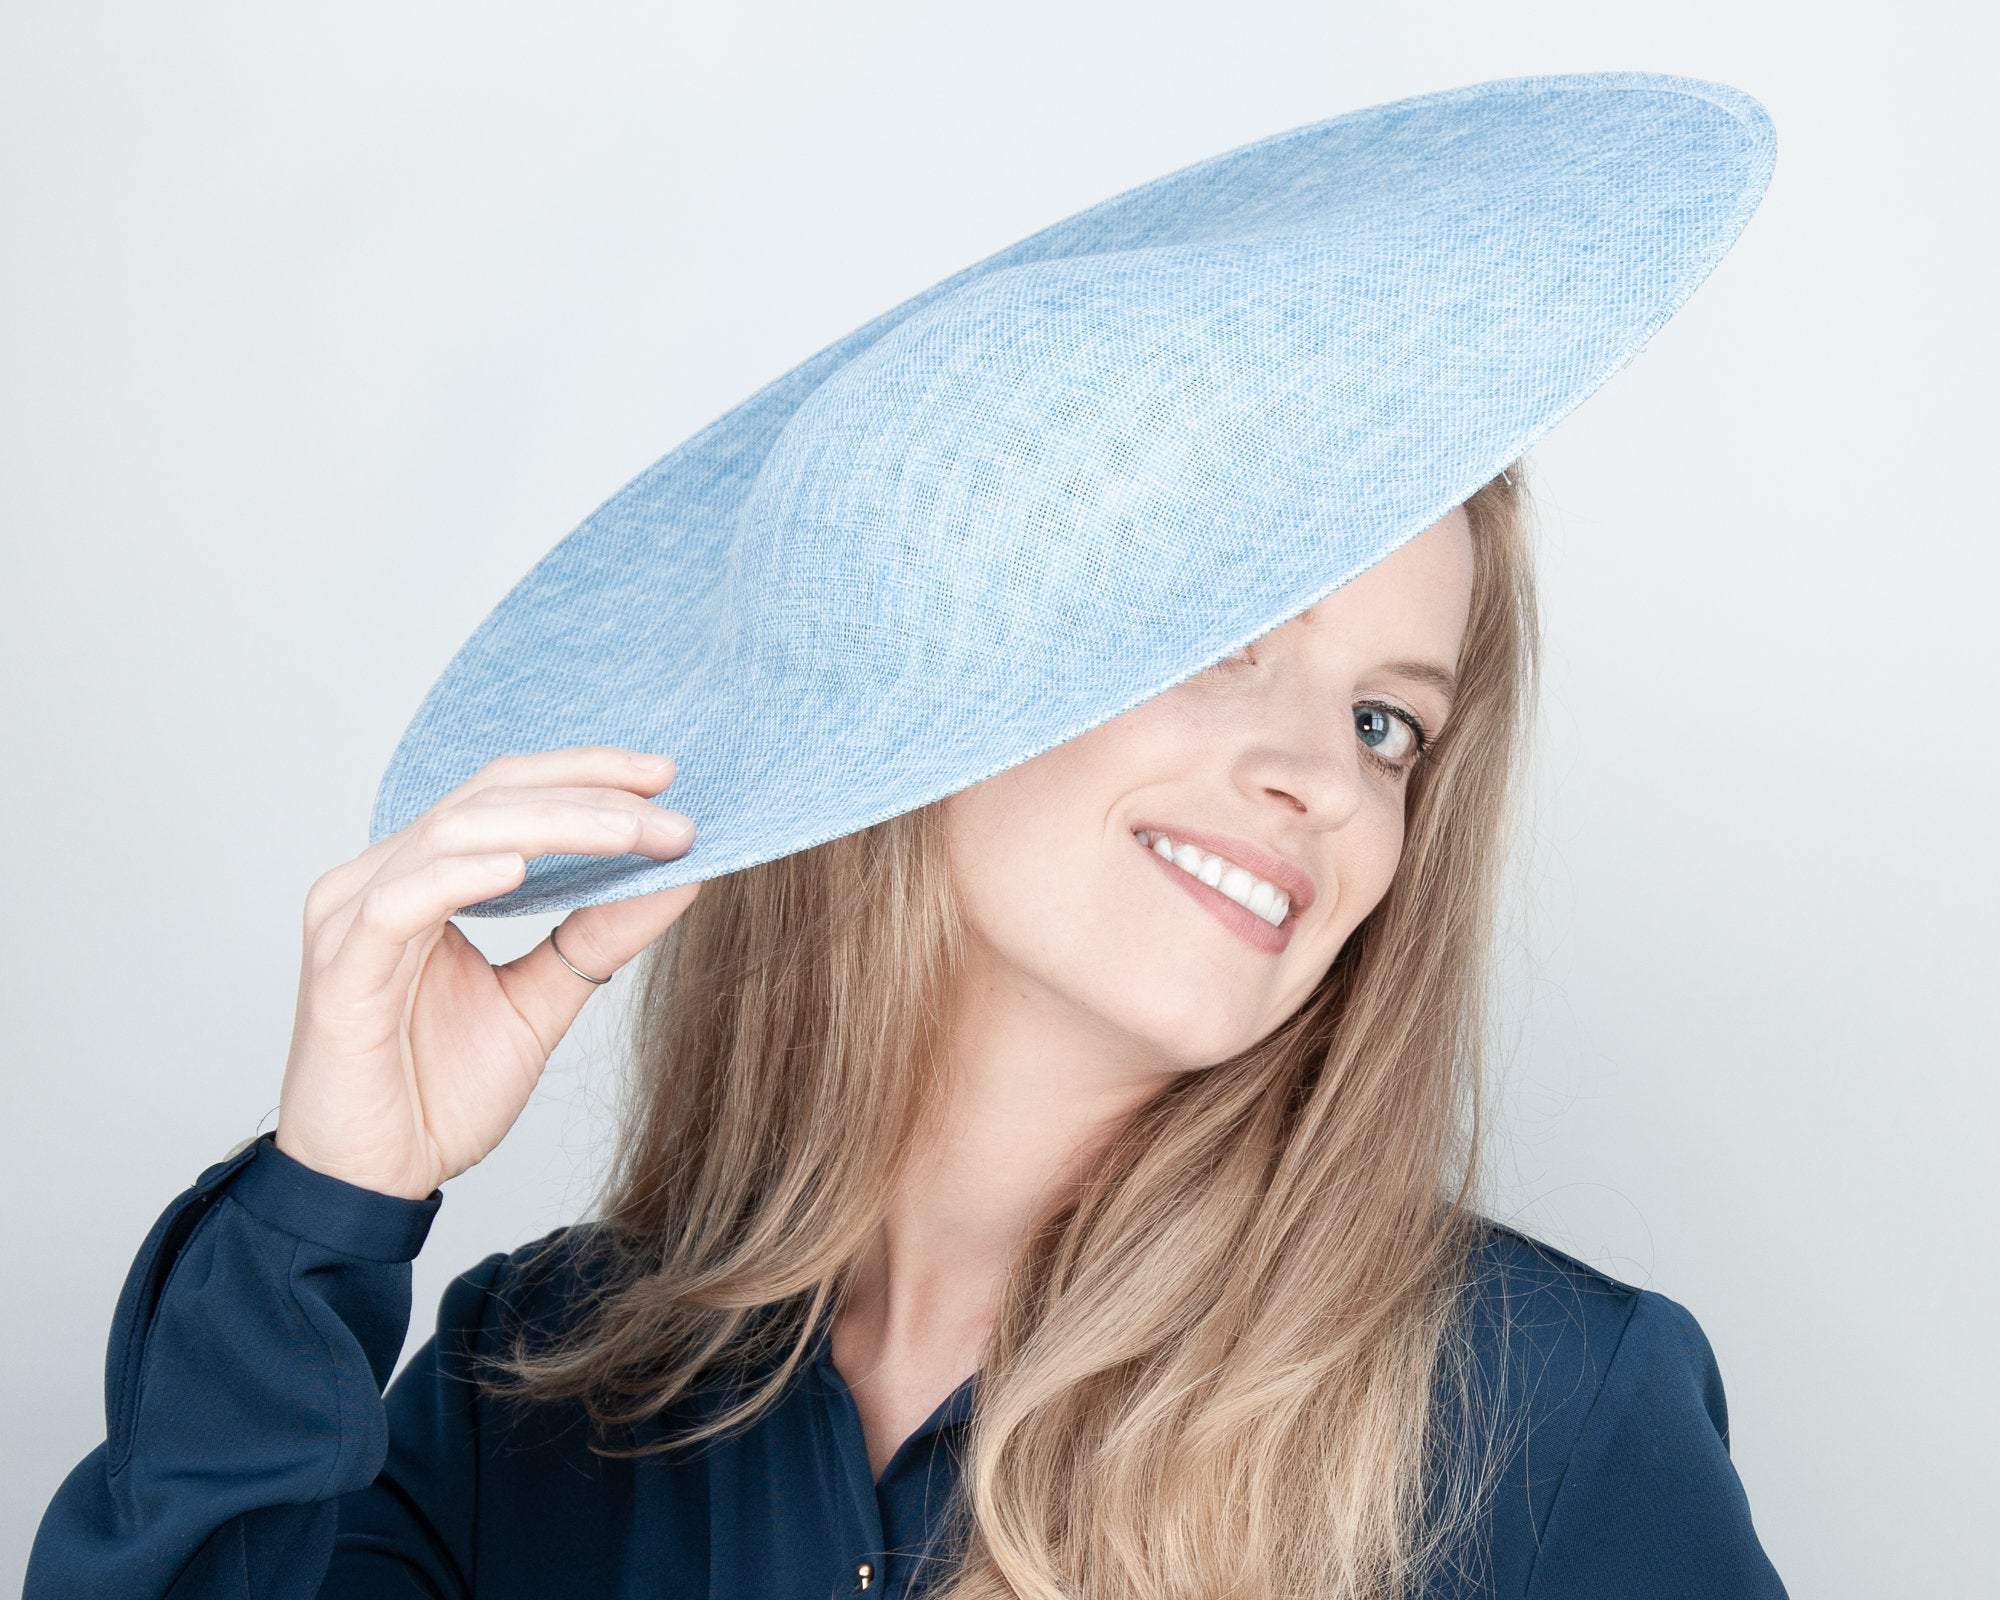 HALO HAT - ROYAL BLUE HEADDRESS FOR THE SUMMER IN 50s NEW LOOK AND CONTEMPORARY OUTFITS © Seegang Berlin